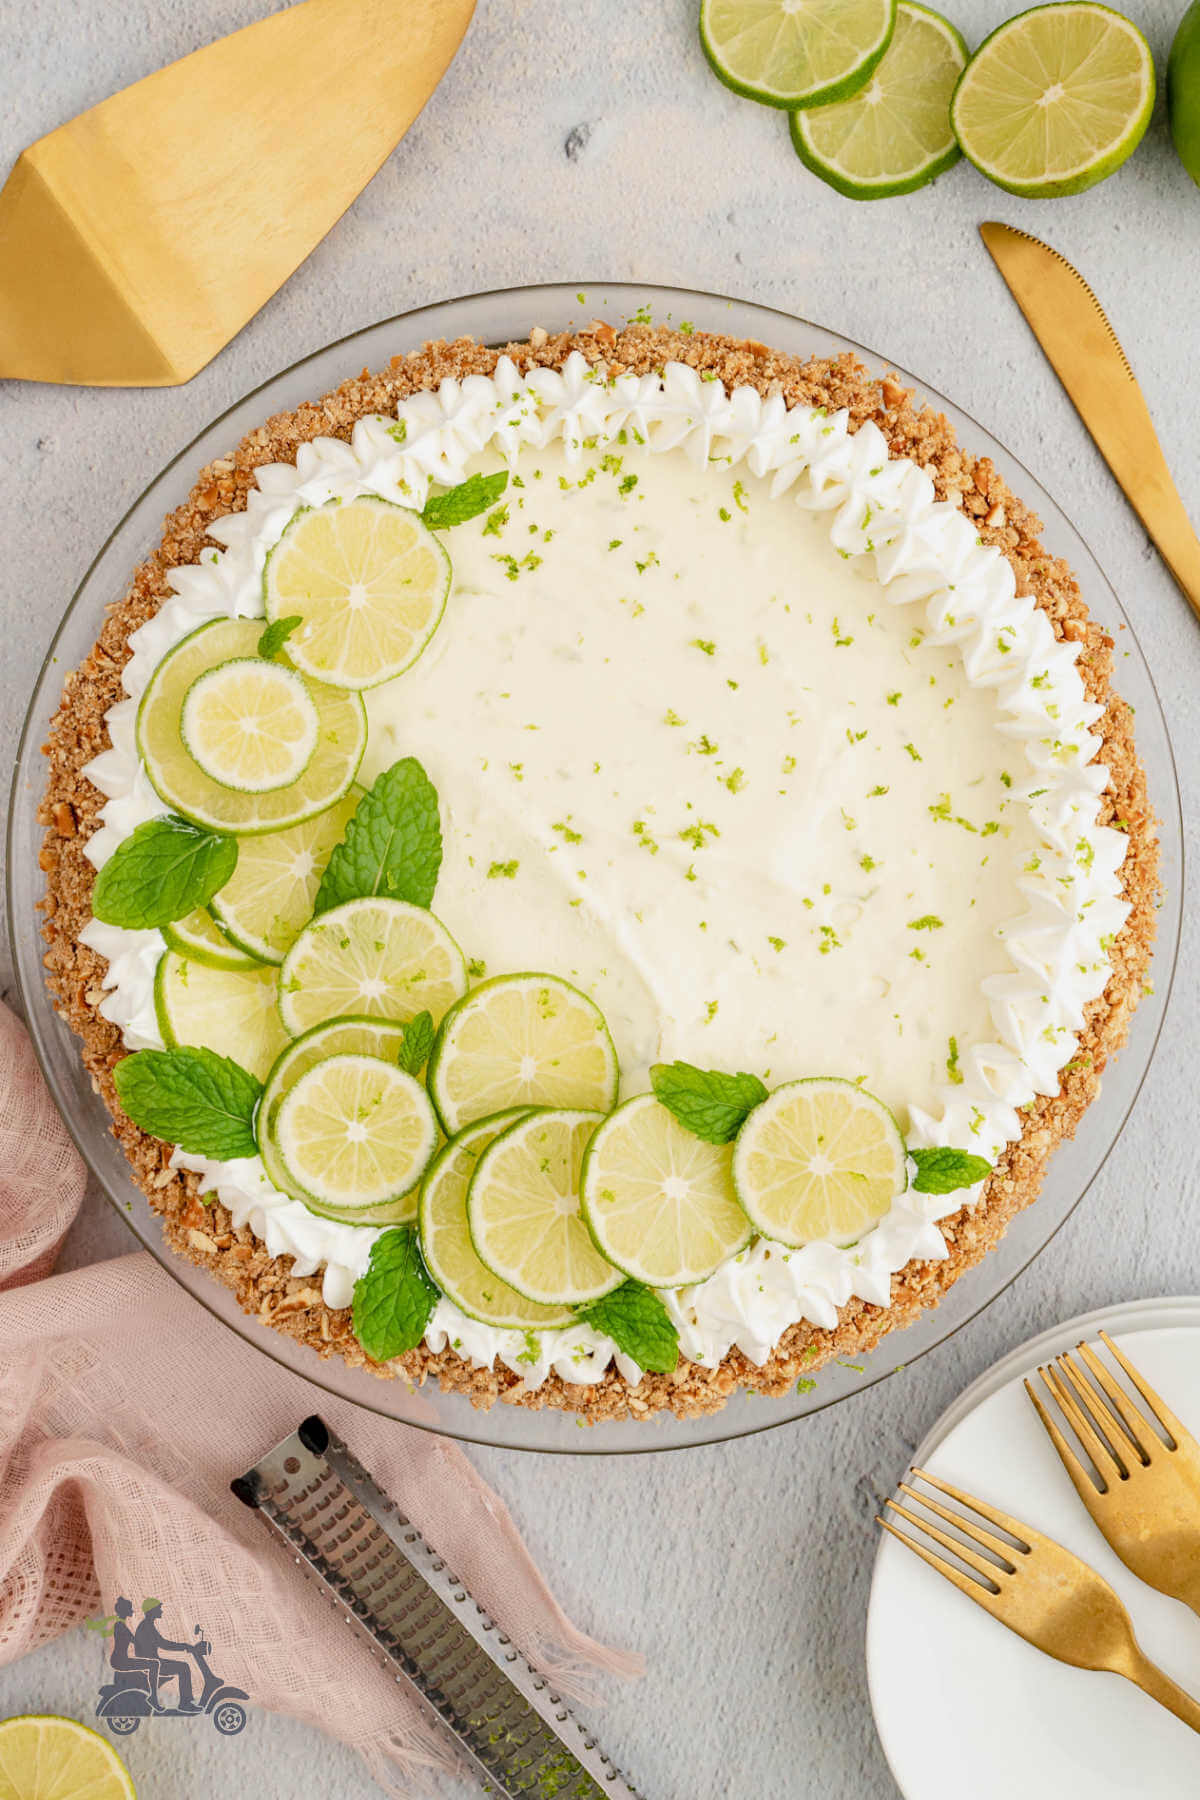 Key lime pie finished with lime slices and a ring of whipped cream. 